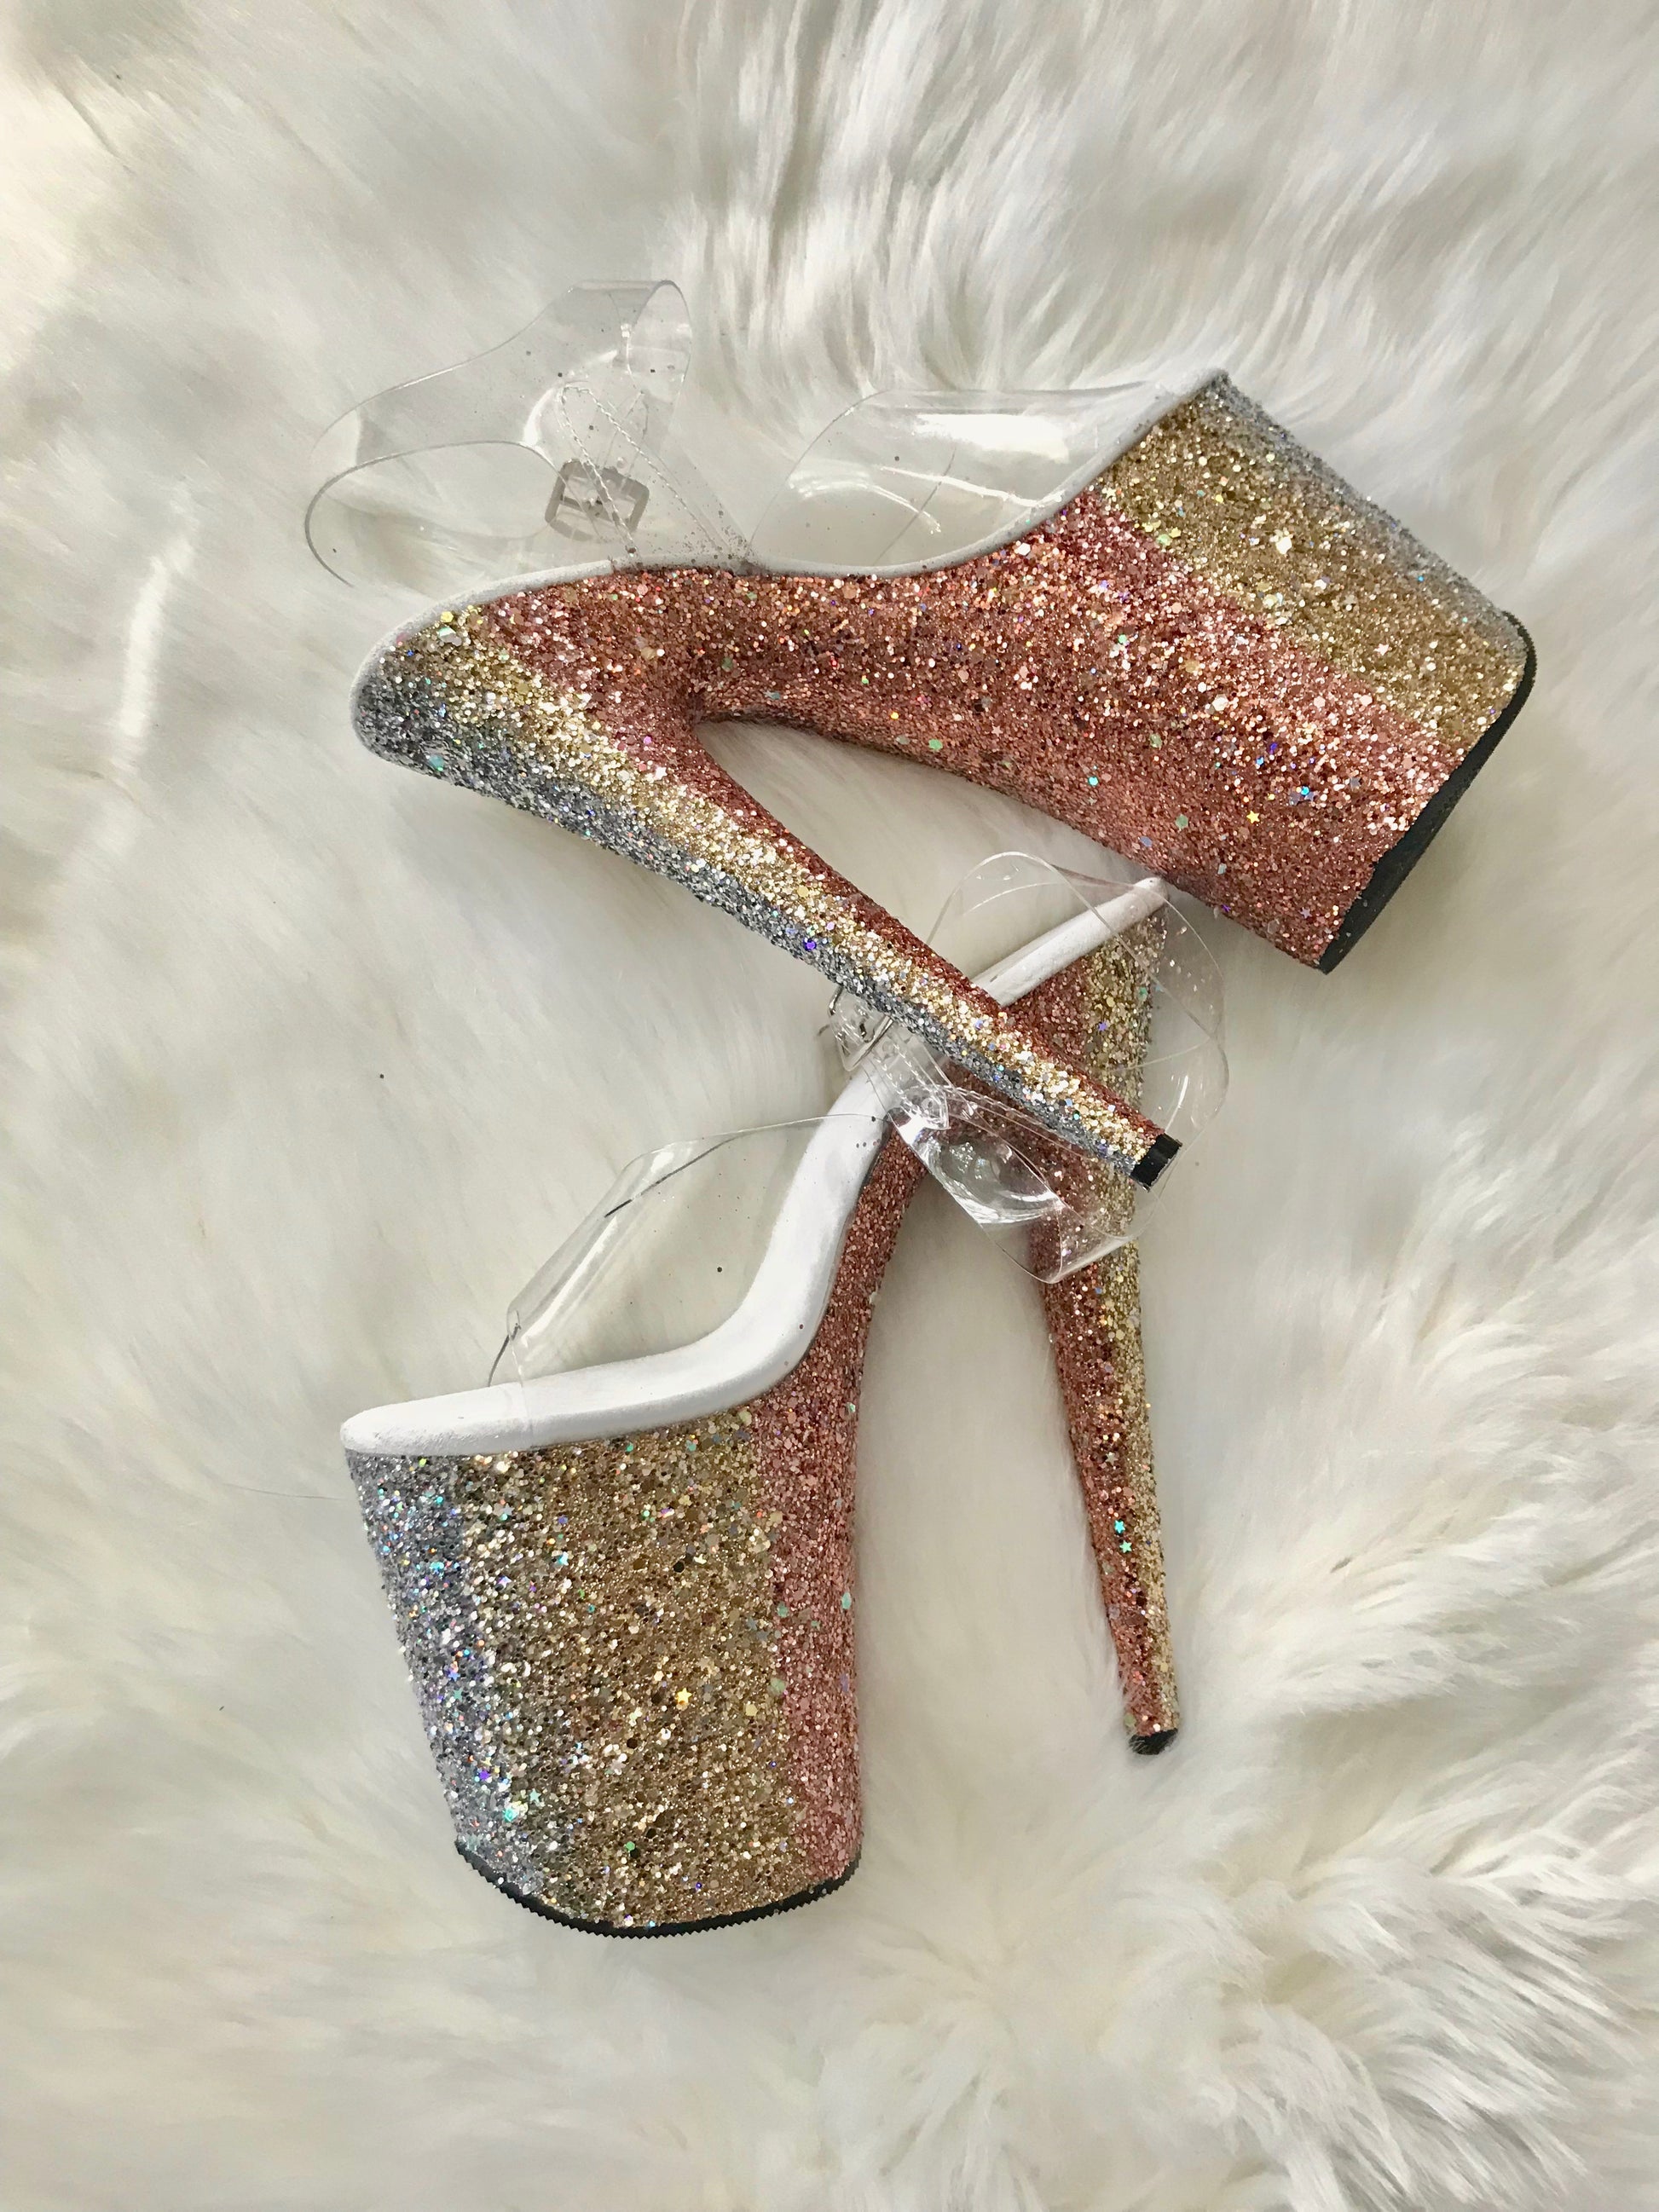 Platform heels with clear straps, and dual Ombre with gold and orange glitter. Shades of gold starting at the front of the platform, and back of the heels, blending to orange glitter under the arch, and down the inside of the heels. White soles.